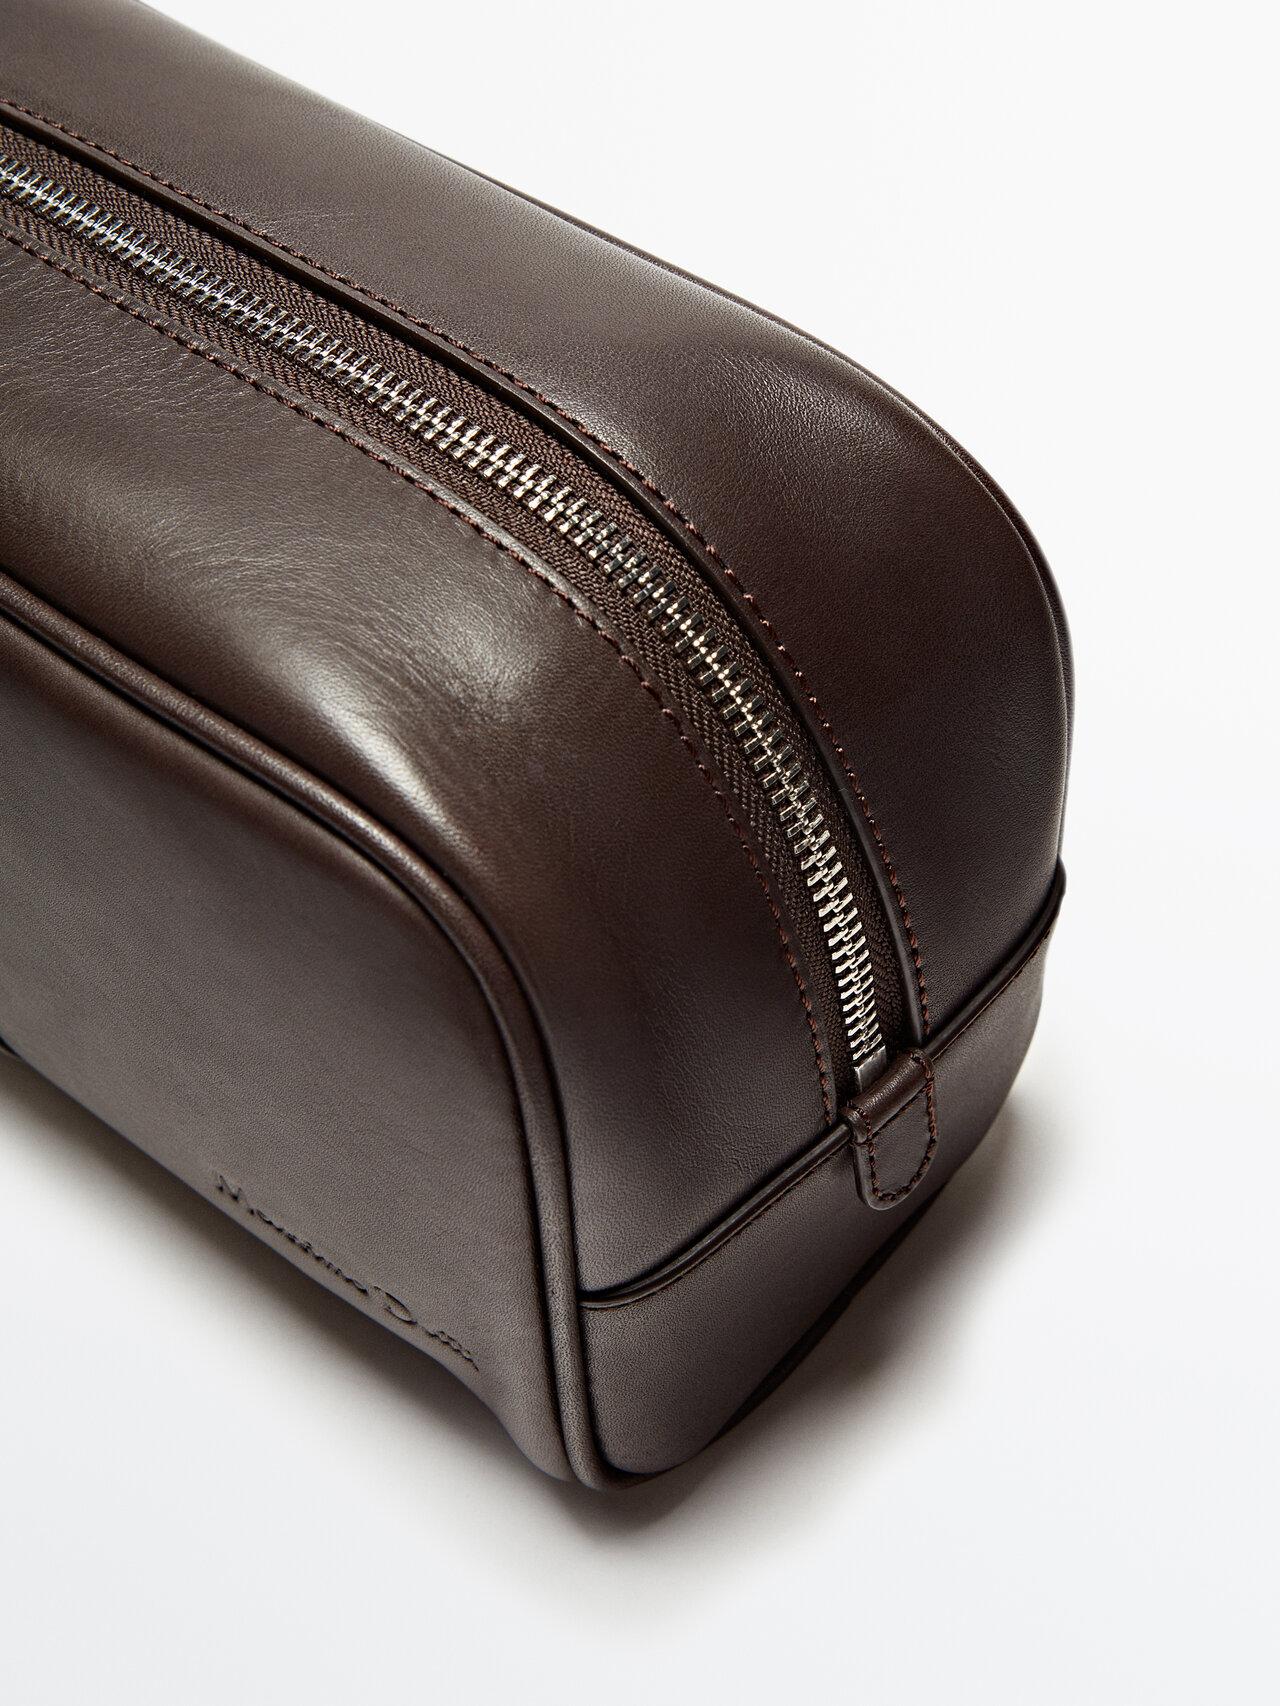 MASSIMO DUTTI Leather Toiletry Bag With Zip in Brown for Men | Lyst